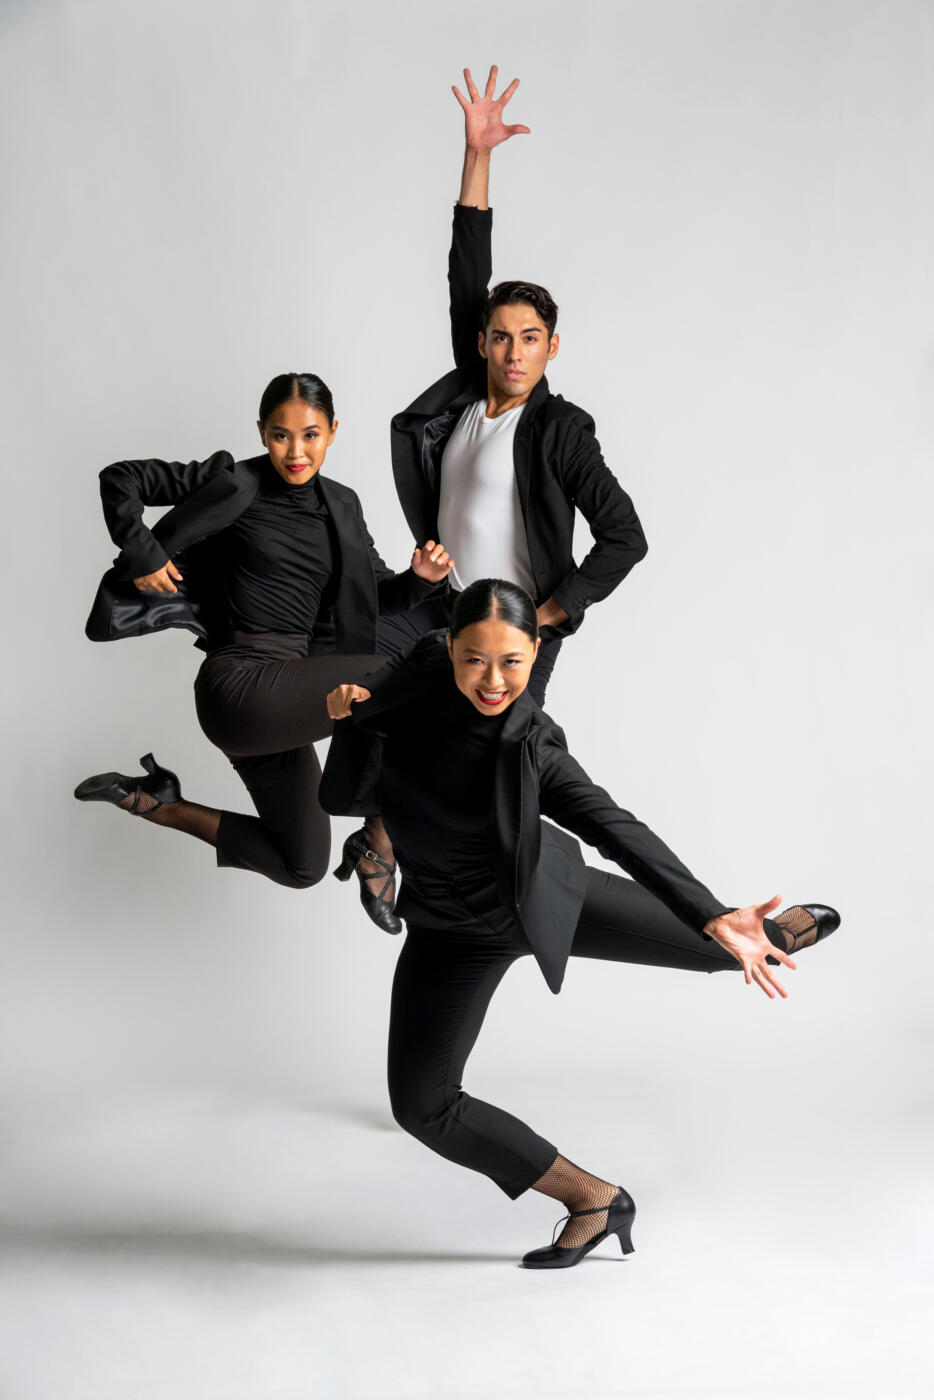 Clockwse from UL Onjelee Phomthirath, Rosario Guillen, Erina Ueda in “Take a Gambol” Photo by Todd Rosenberg